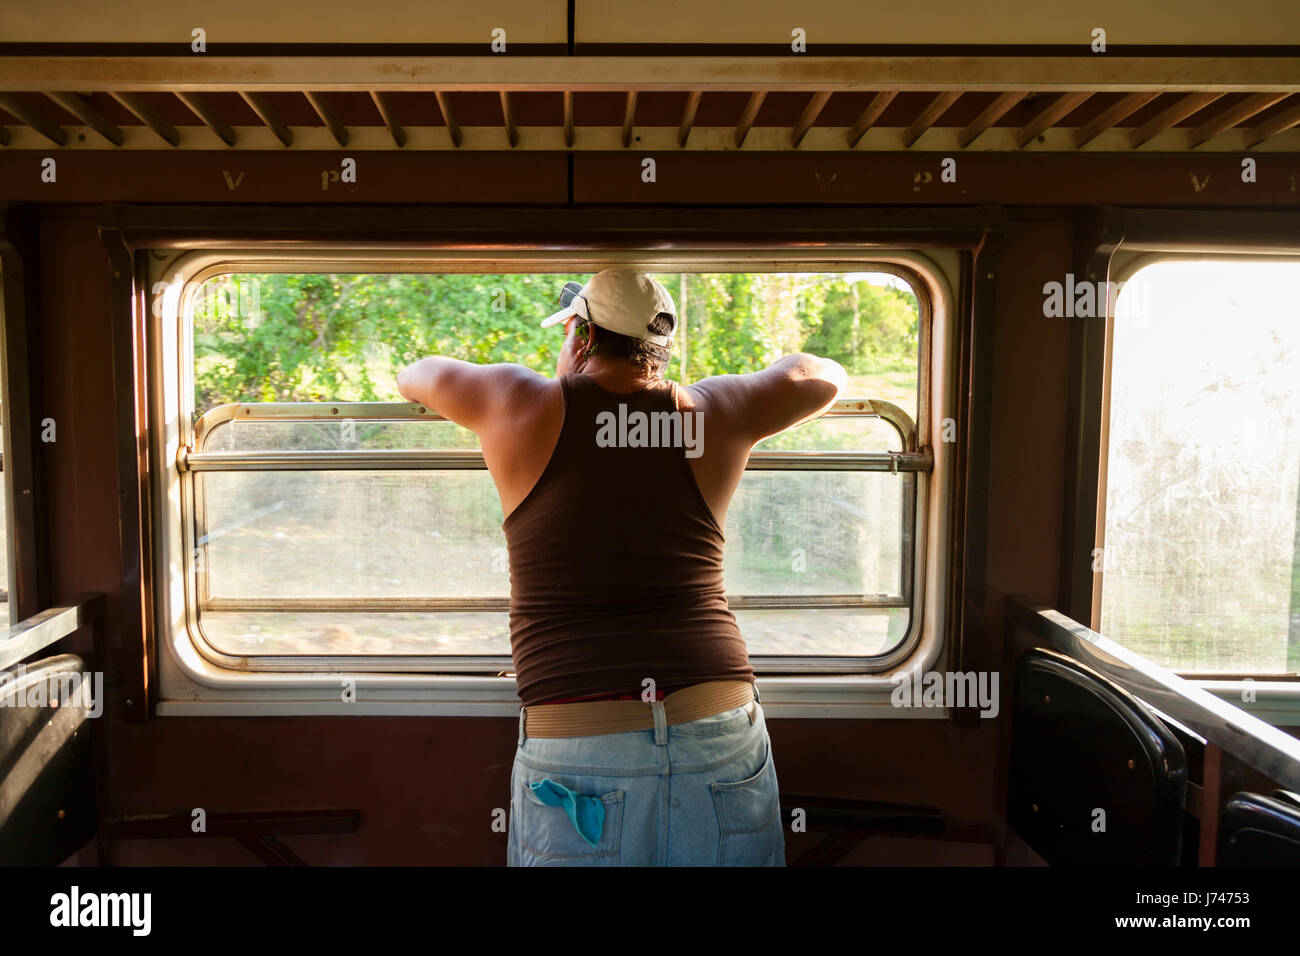 A man looking out a train window in Cuba. Stock Photo